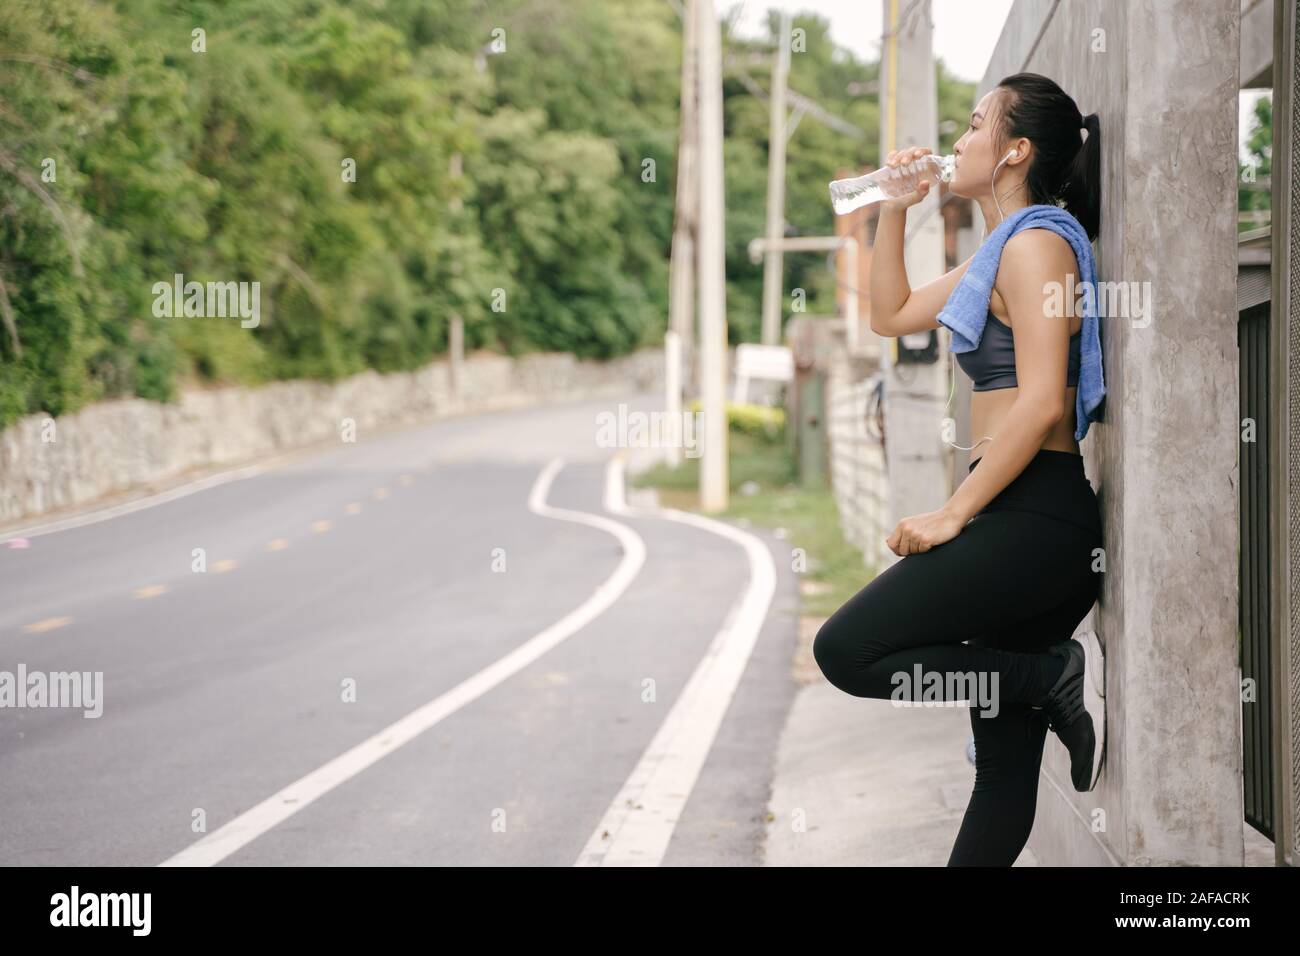 Young Asian woman runner resting after workout running and drinking water in street road. Stock Photo